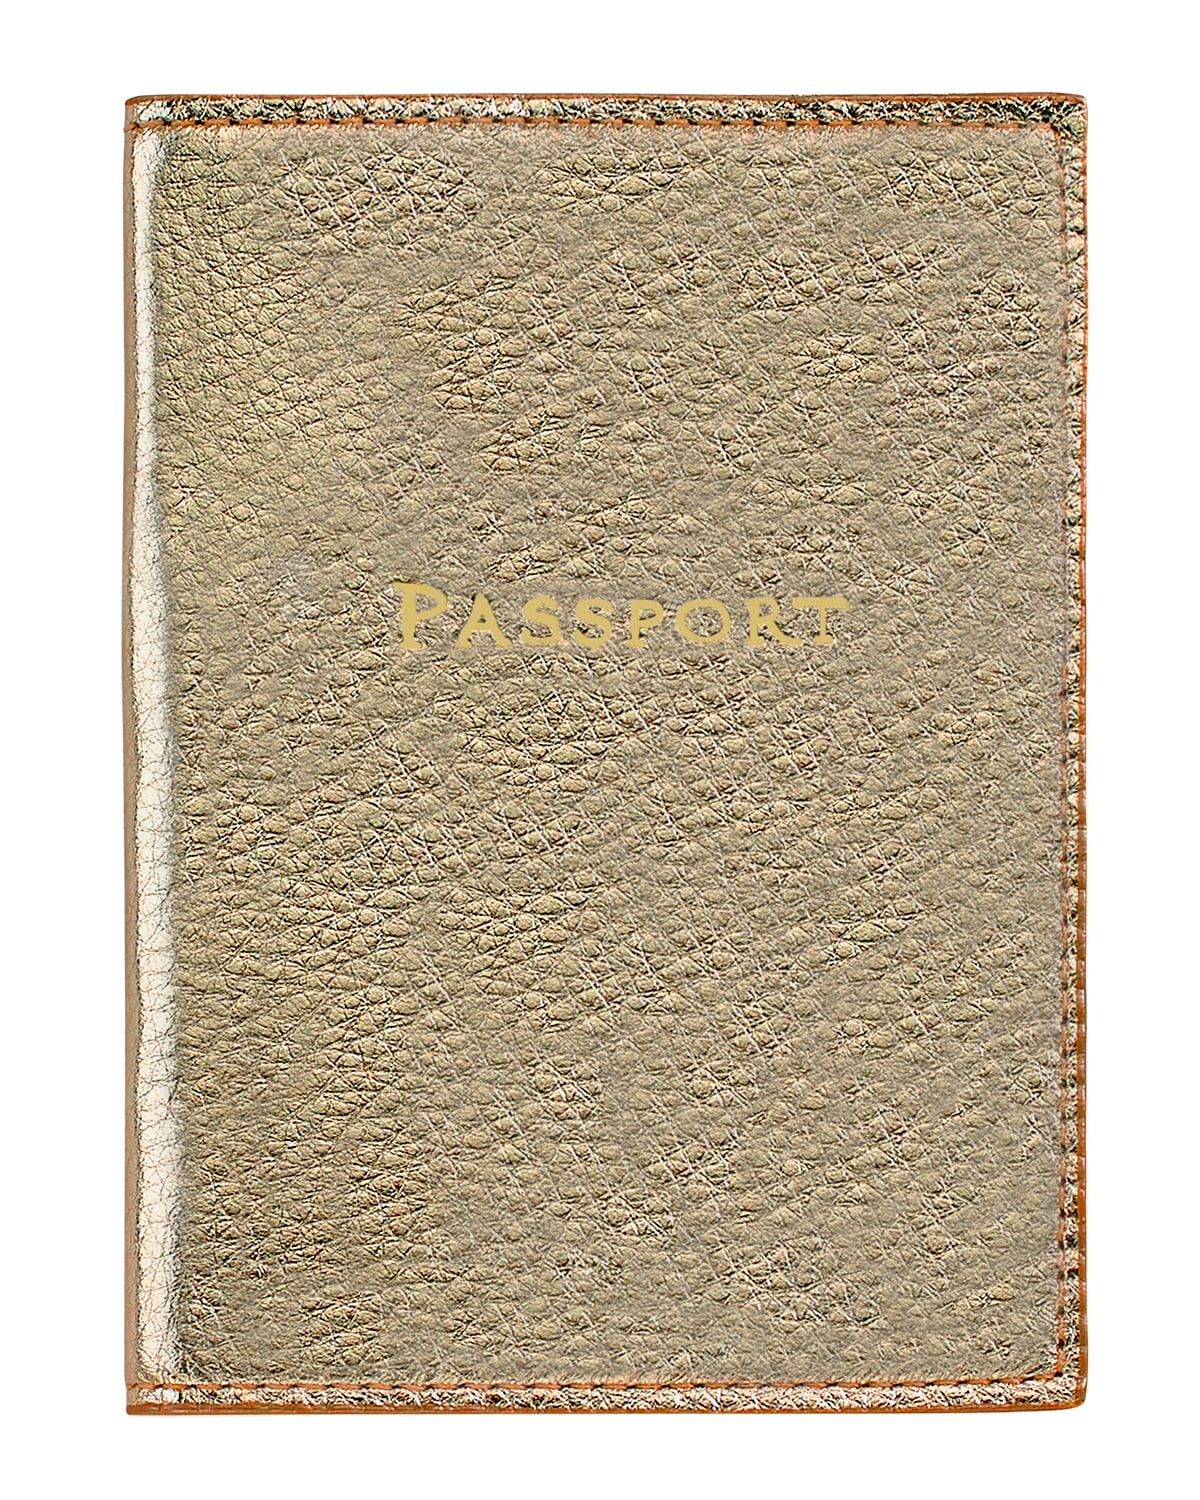 Graphic Image Passport Cover In Gold